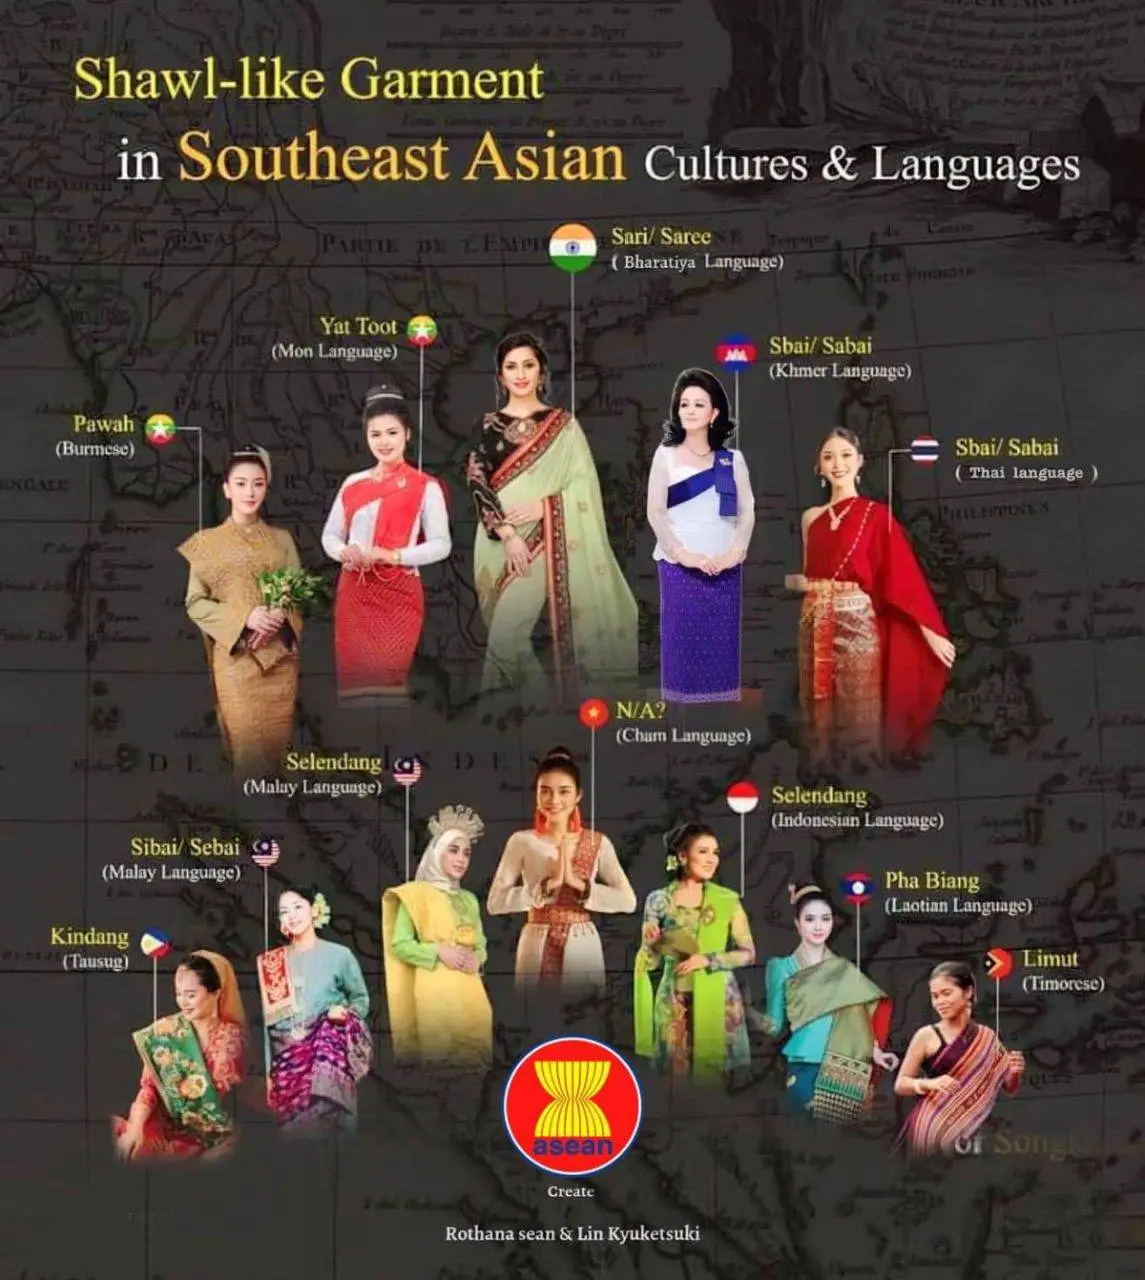 ASEAN national costume. ASEAN national dress.Important Historical Sites + Traditional Costumes DES LEUR ARC OF Southeast Asia. Cambodia history.